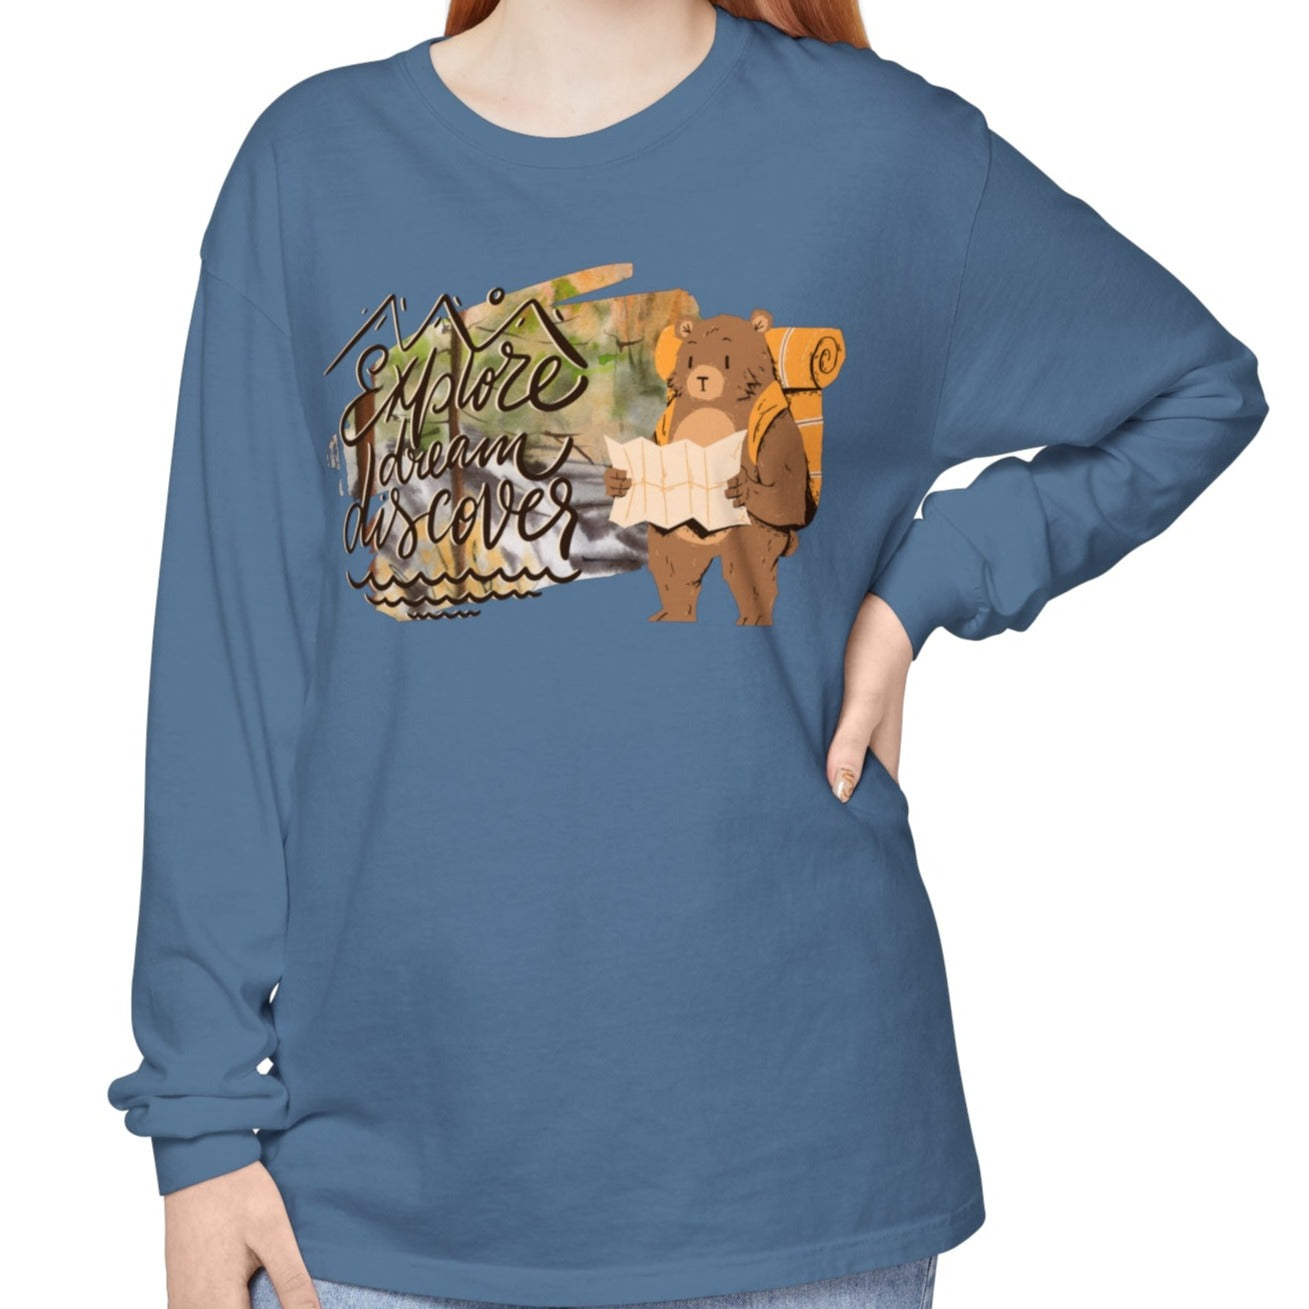 Women's Comfort Colors Long Sleeve Tee: 'Explore, Dream, Explore' with Backpacking Bear - Eddy and Rita